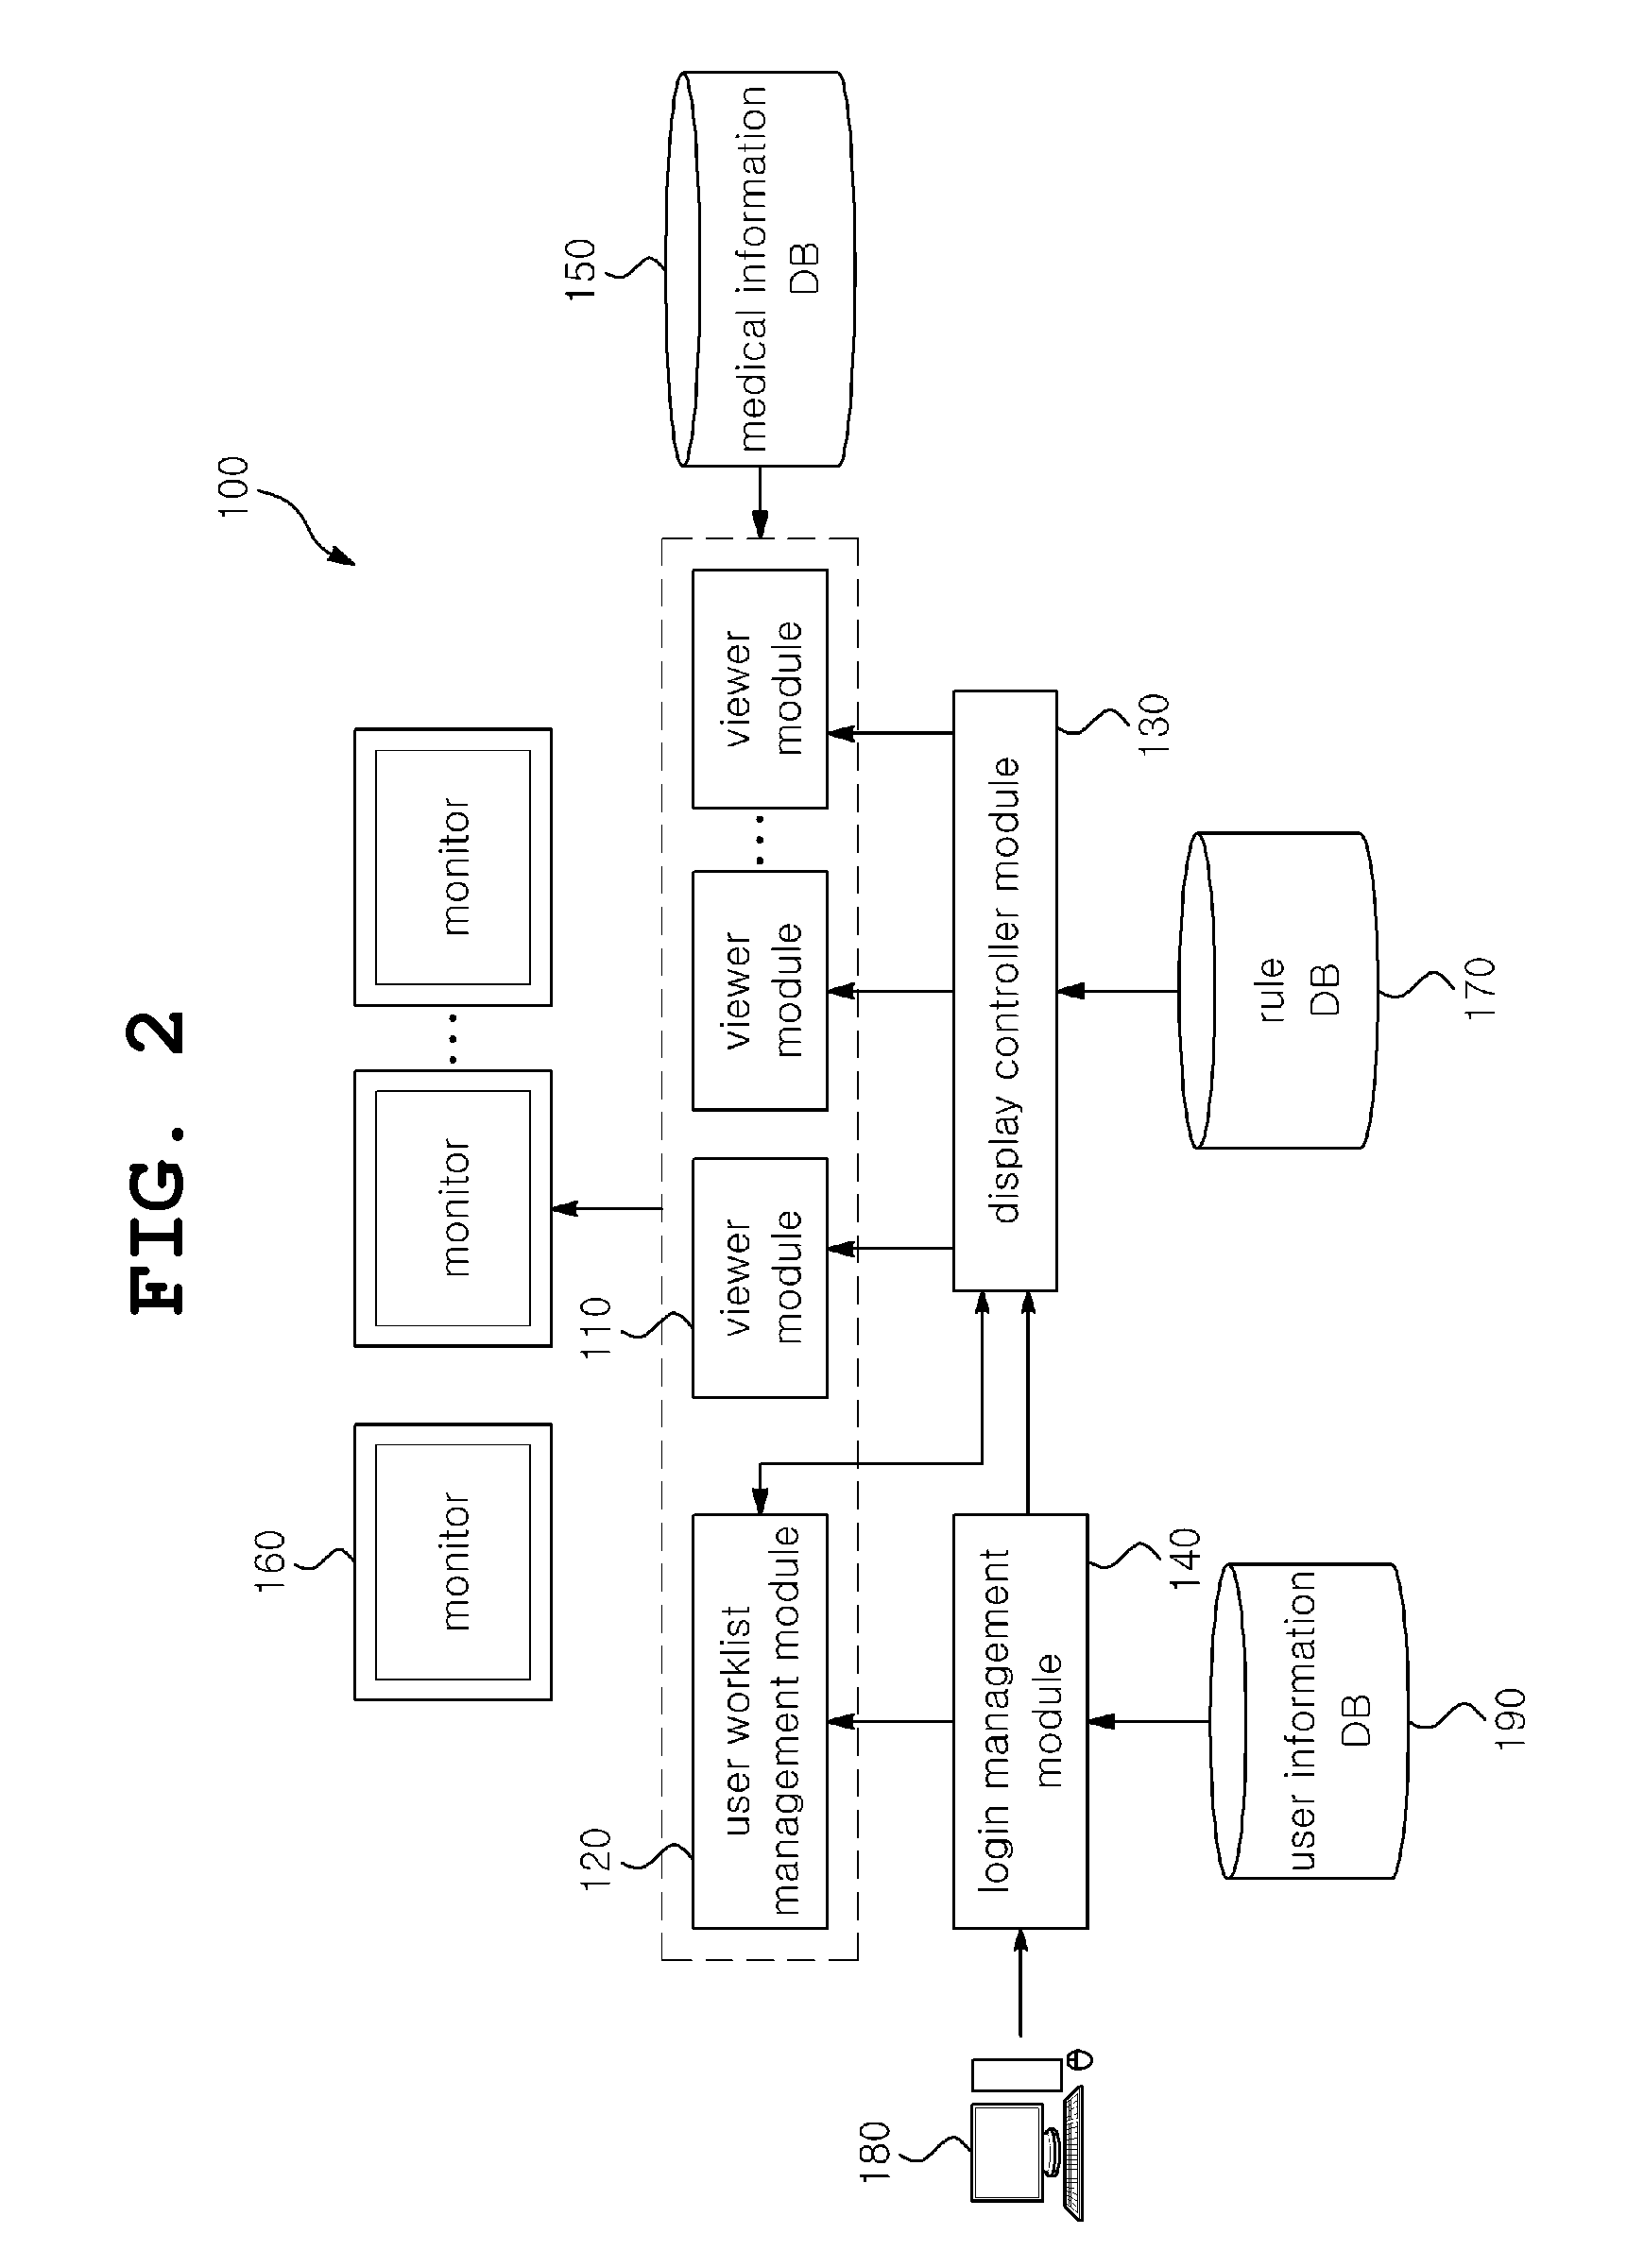 System and method for supplying medical image